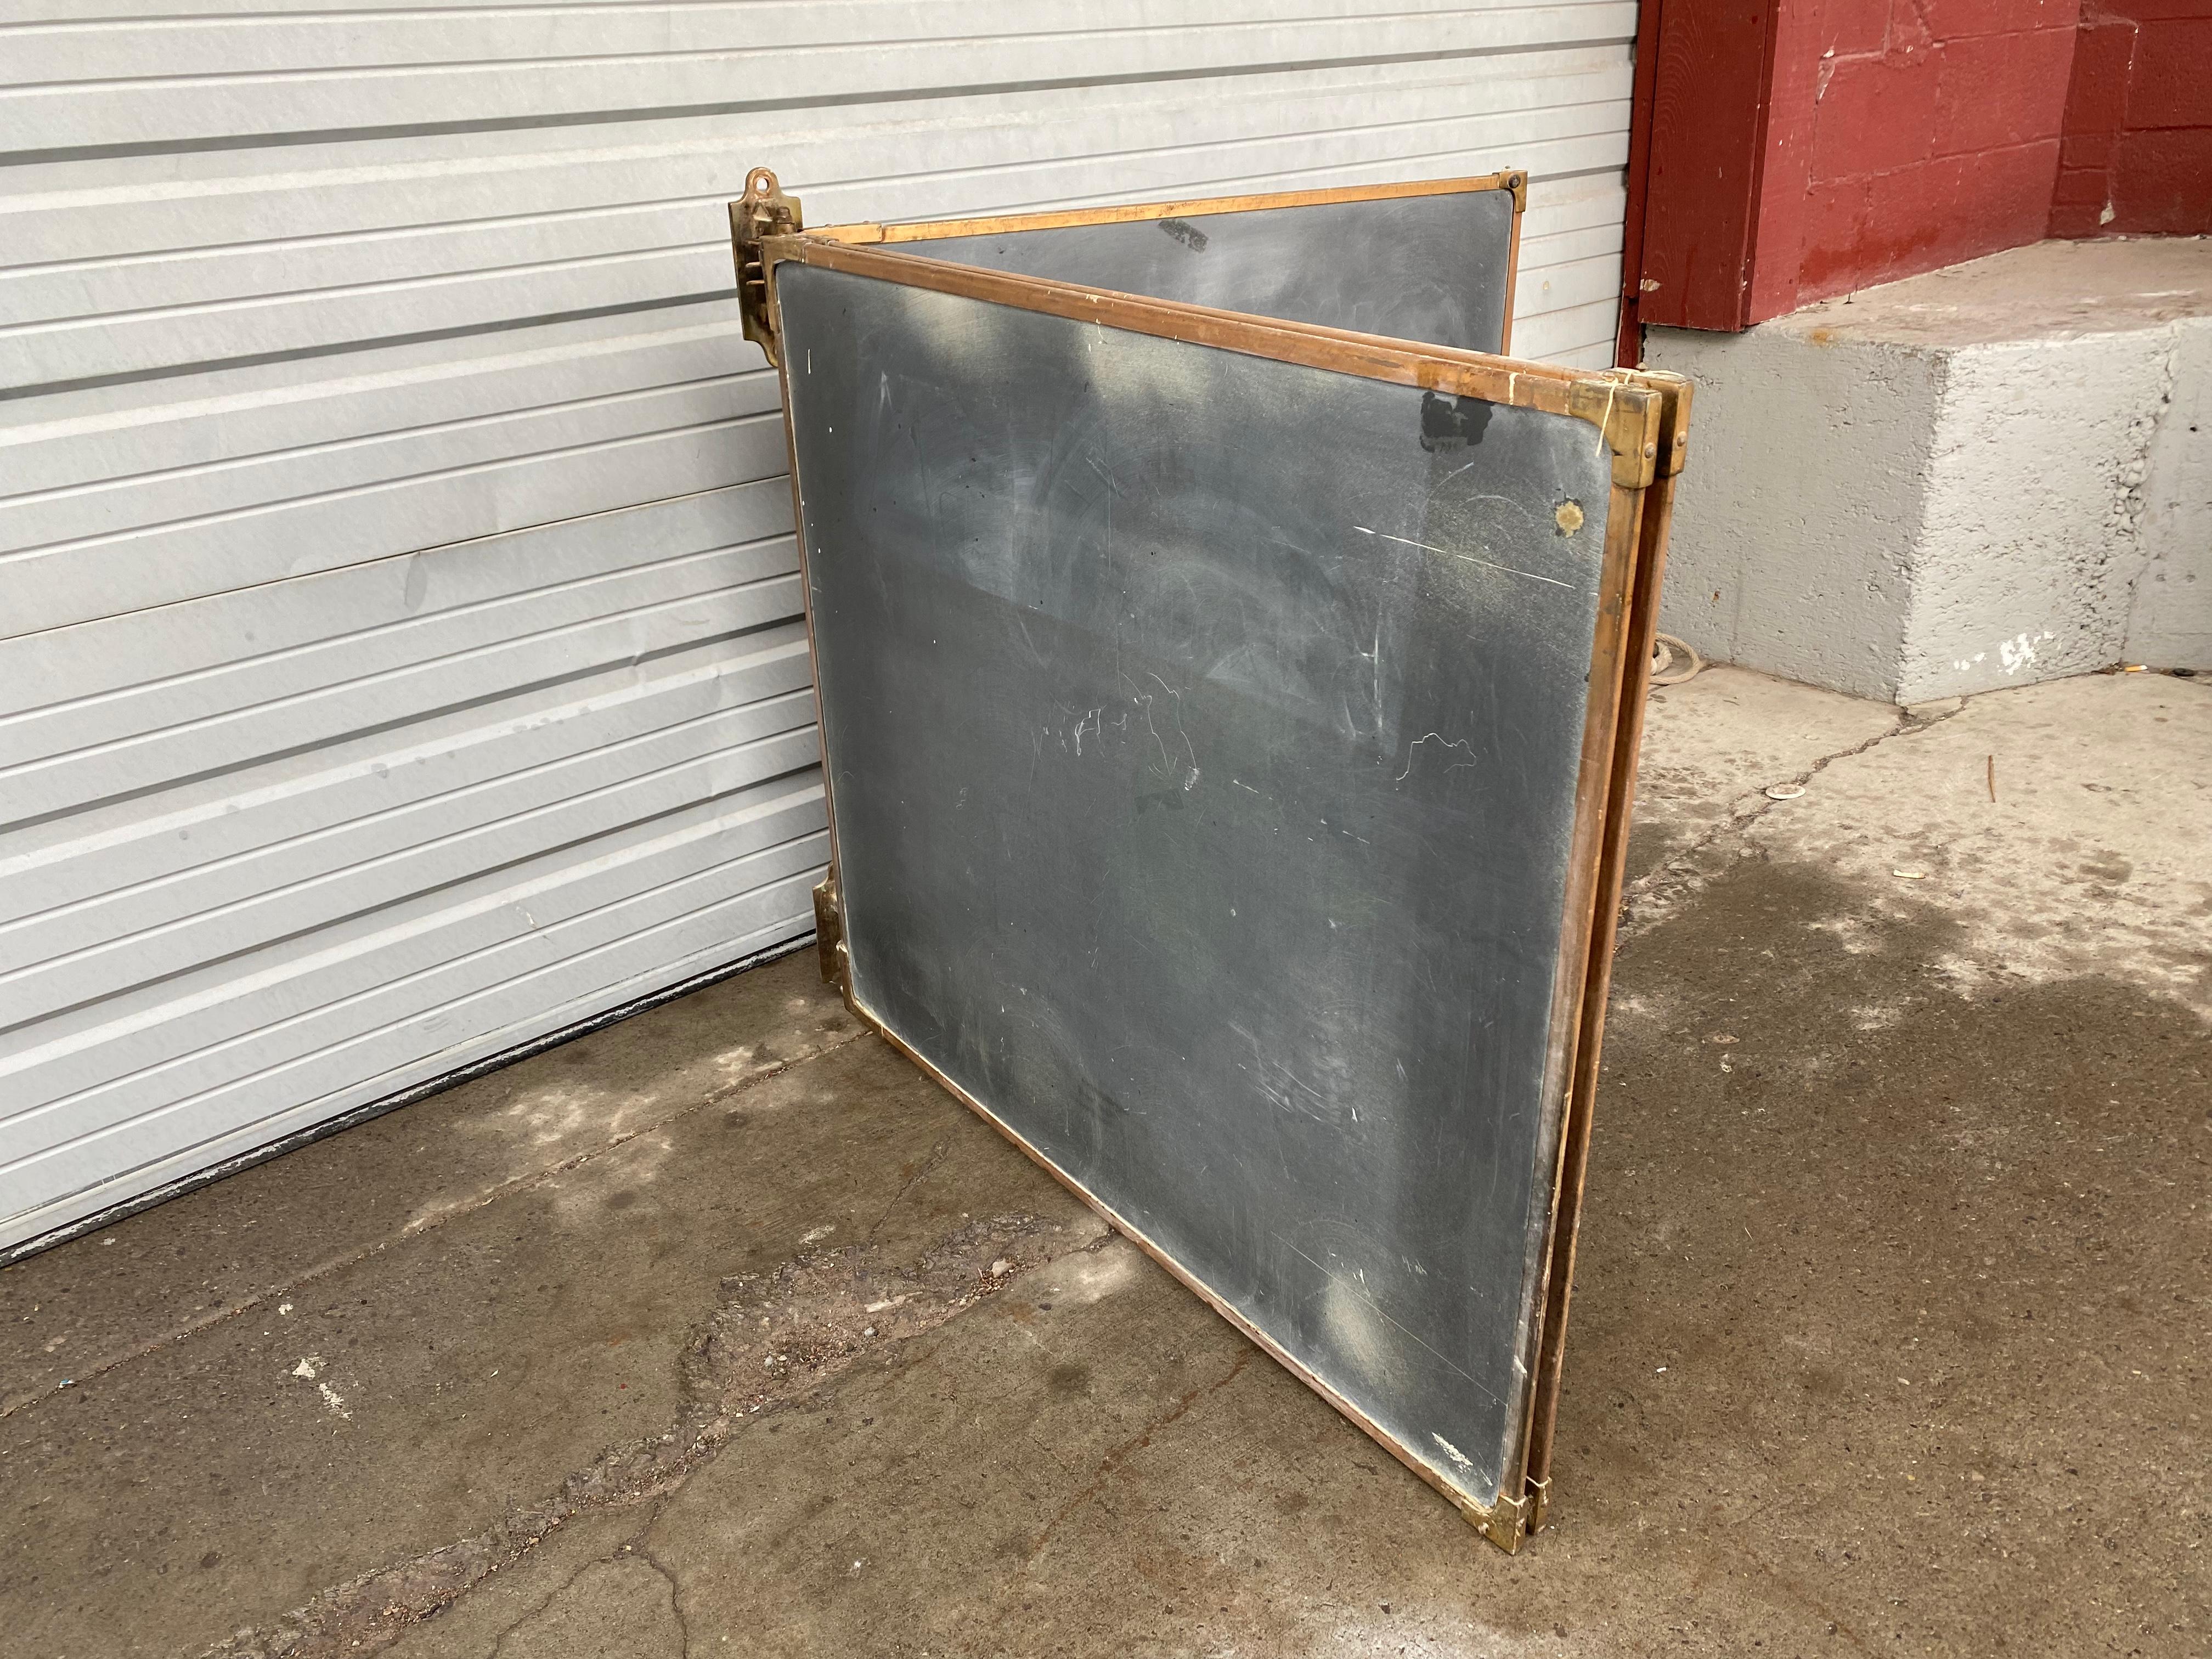 An outstanding set of antique slate chalkboards in their original frames with bronze corners, along with the bronze wall mounted brackets that hold them all and allow them to pivot to use both sides of the boards. Beautiful set in very good